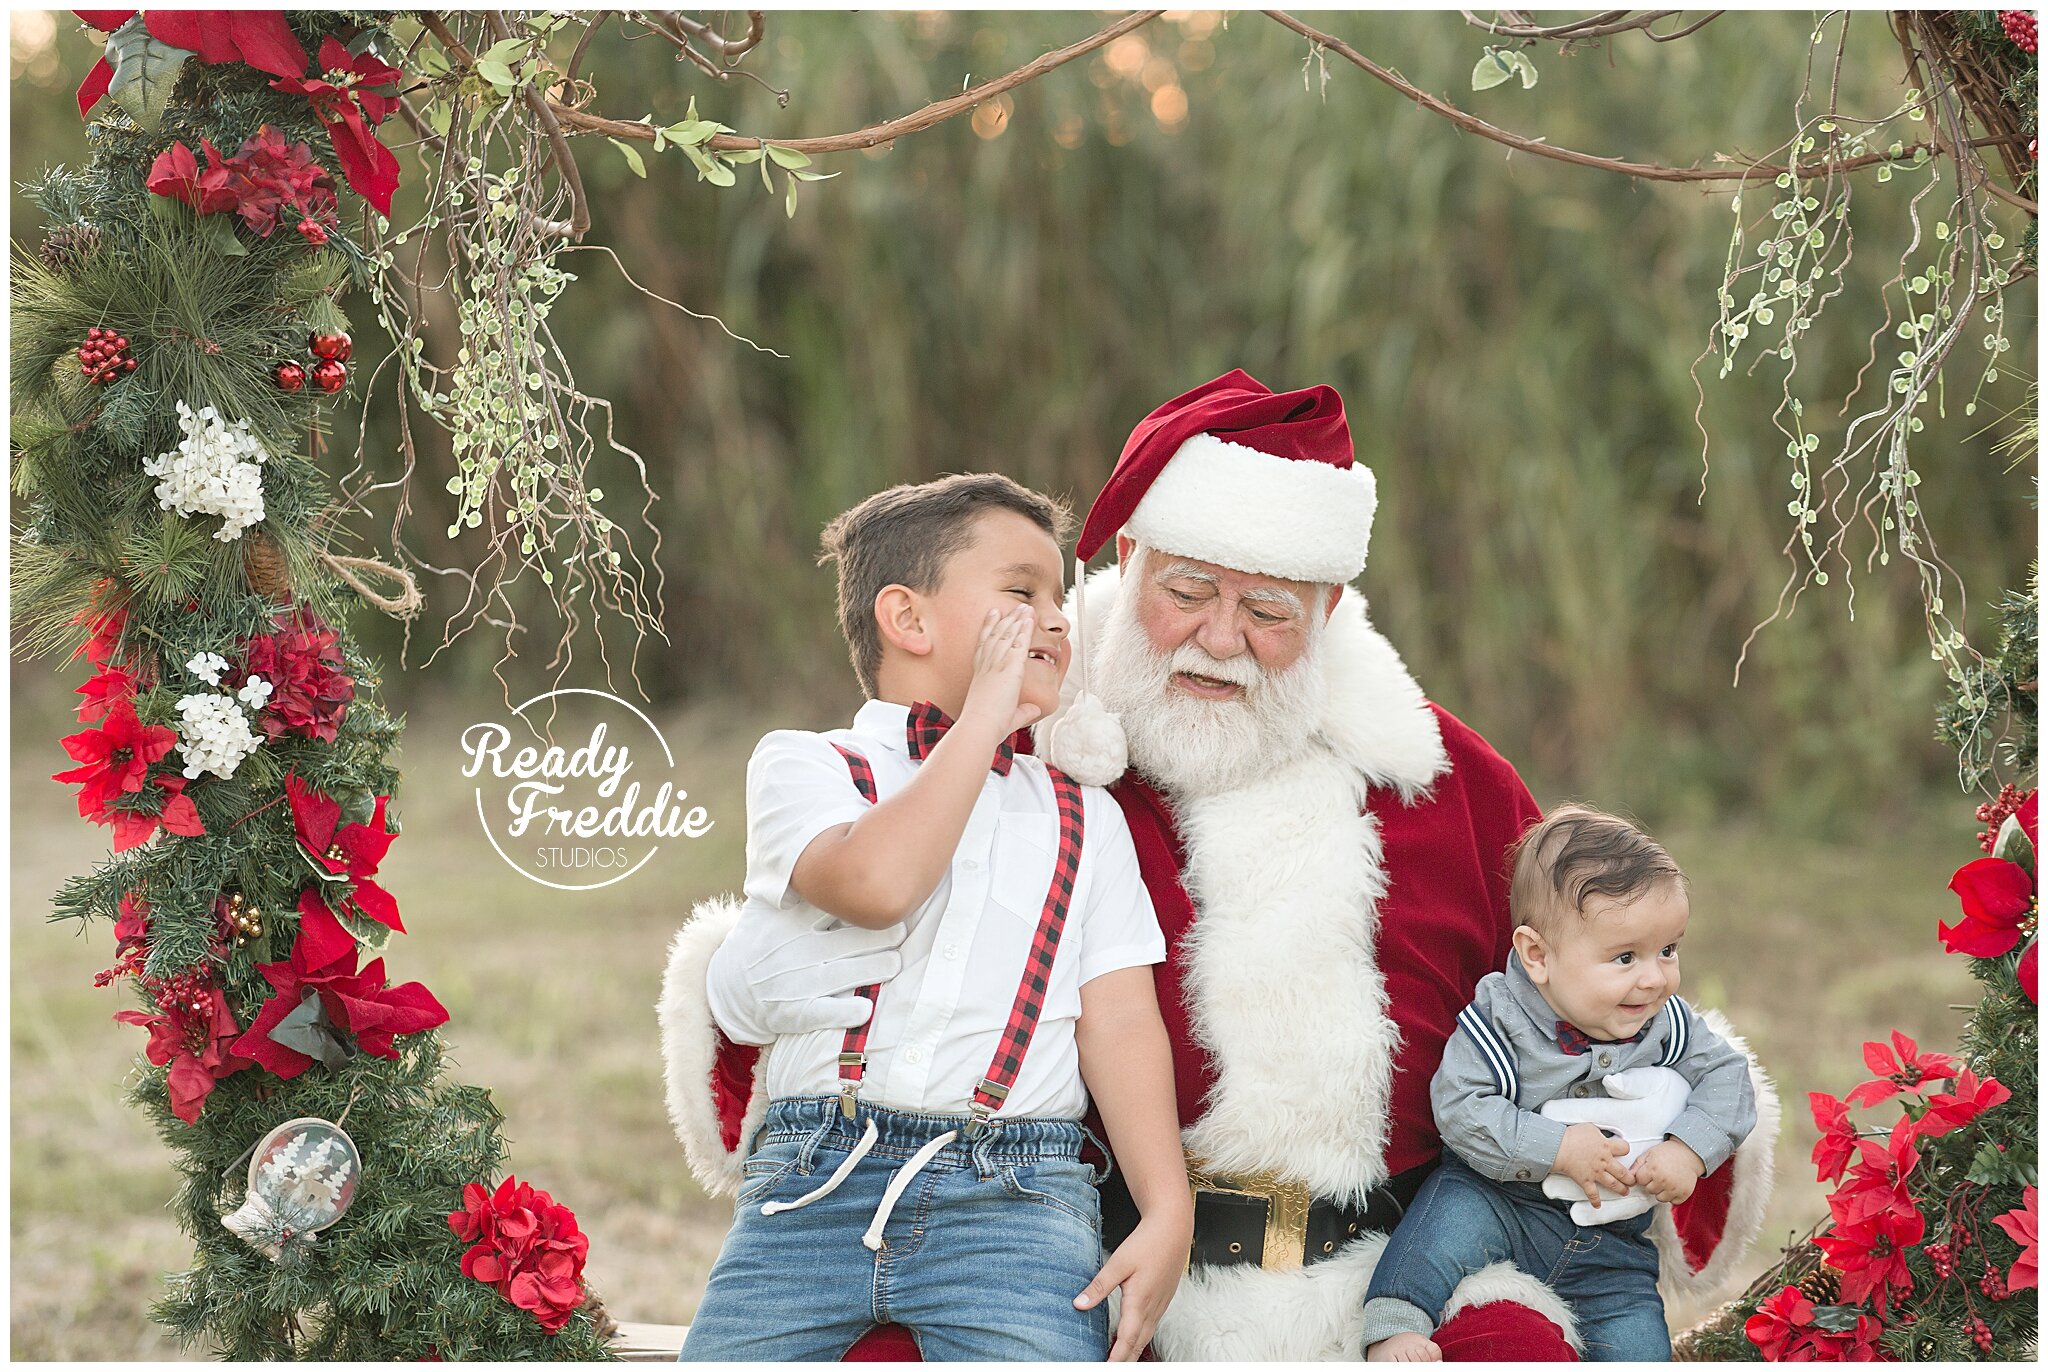 Sibling pictures with Santa and giant wreath outdoor with Ivanna Vidal Photography